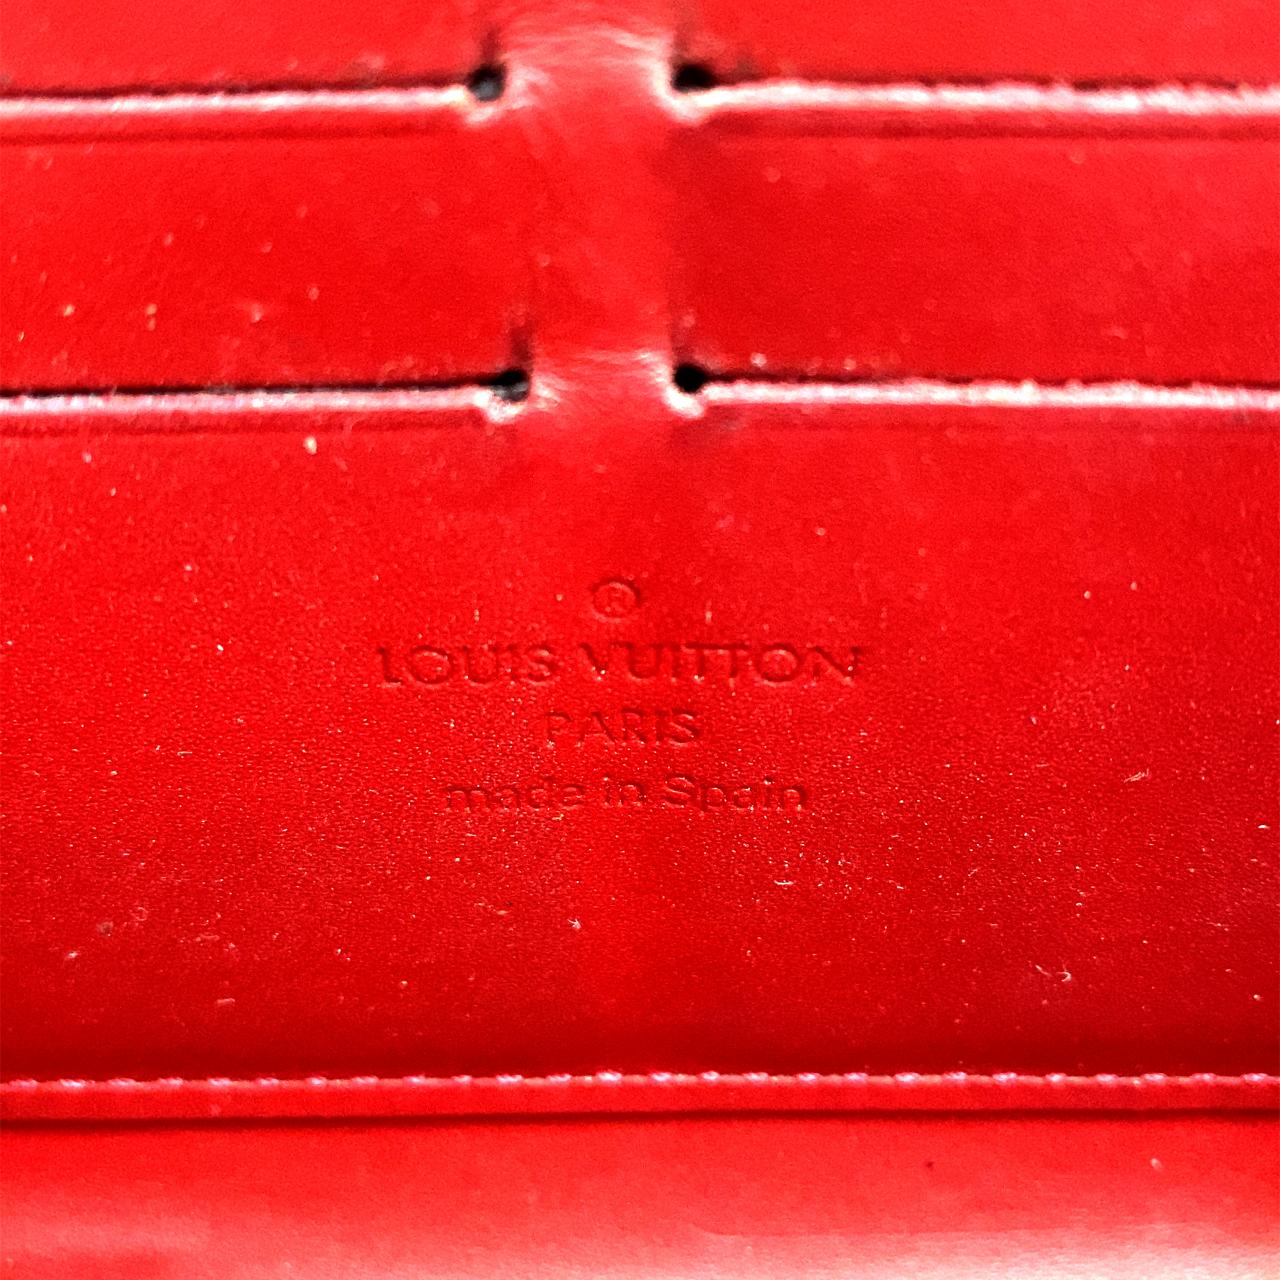 Louis Vuitton Zippy Wallet Red Patent Leather Wallet (Pre-Owned)